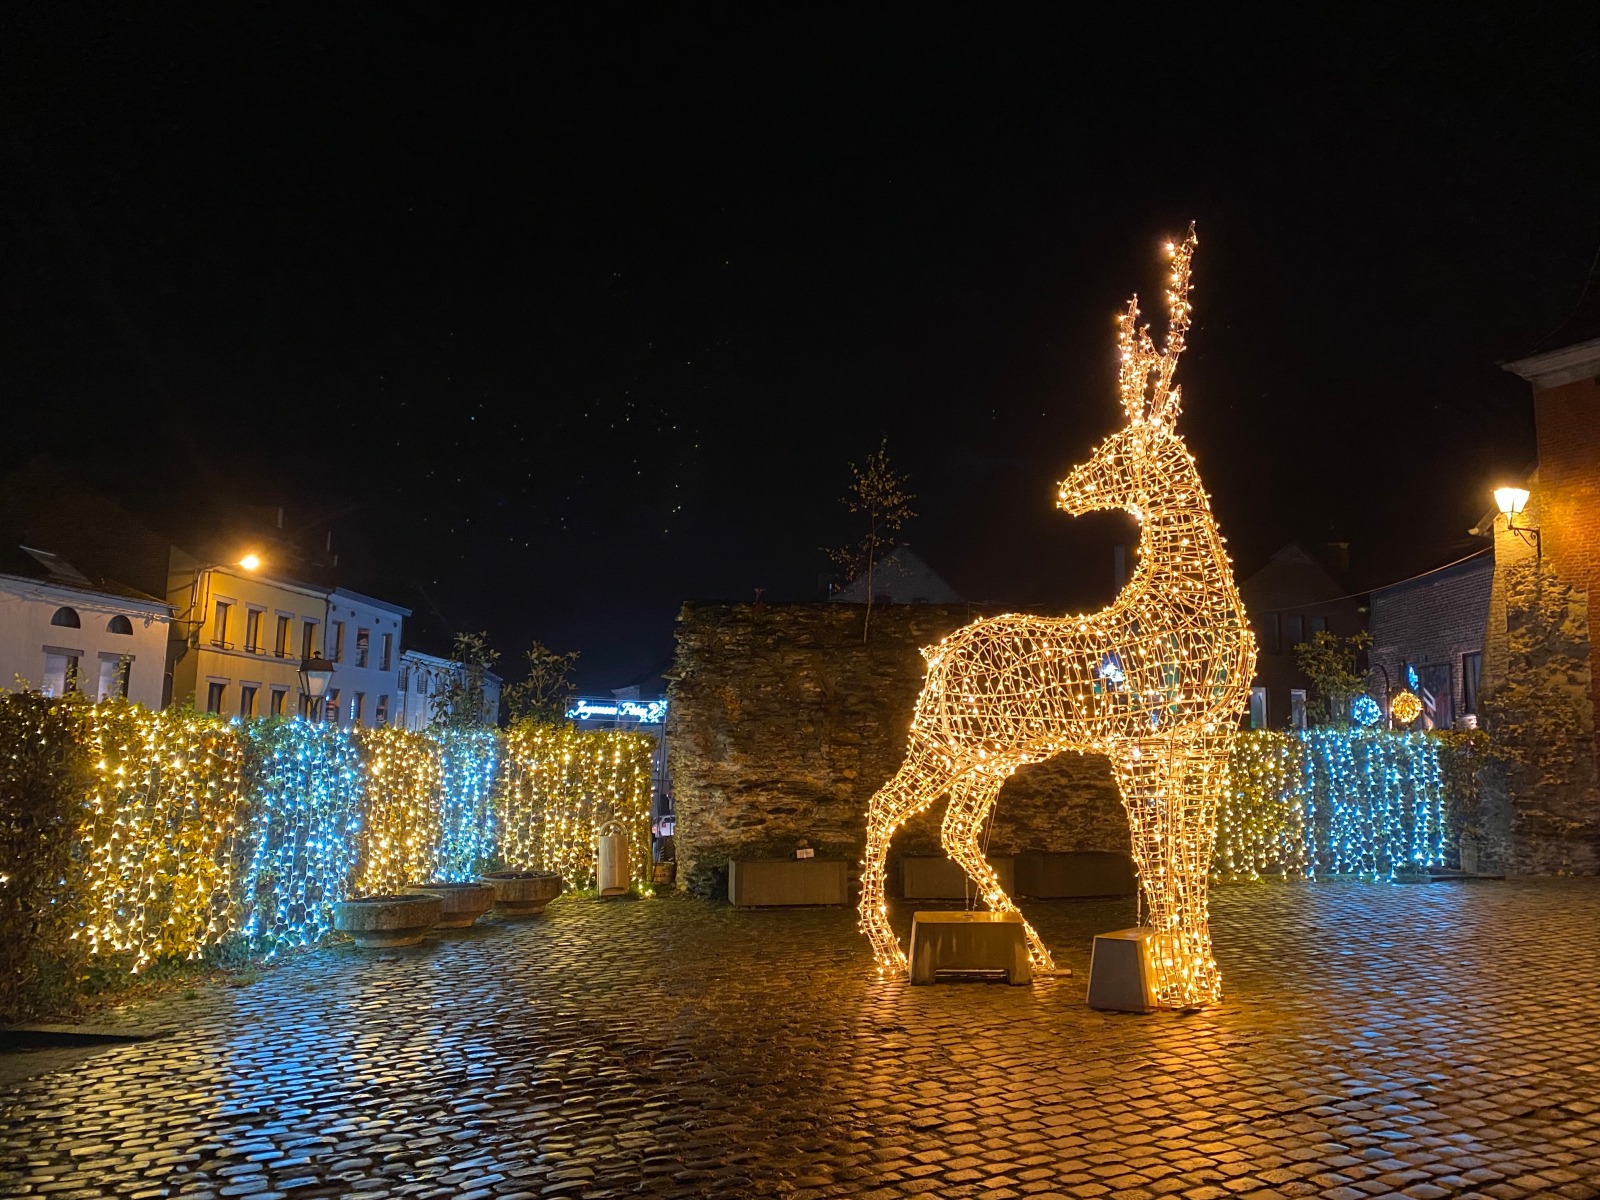 Lit statue representing a reindeer, set on the village square